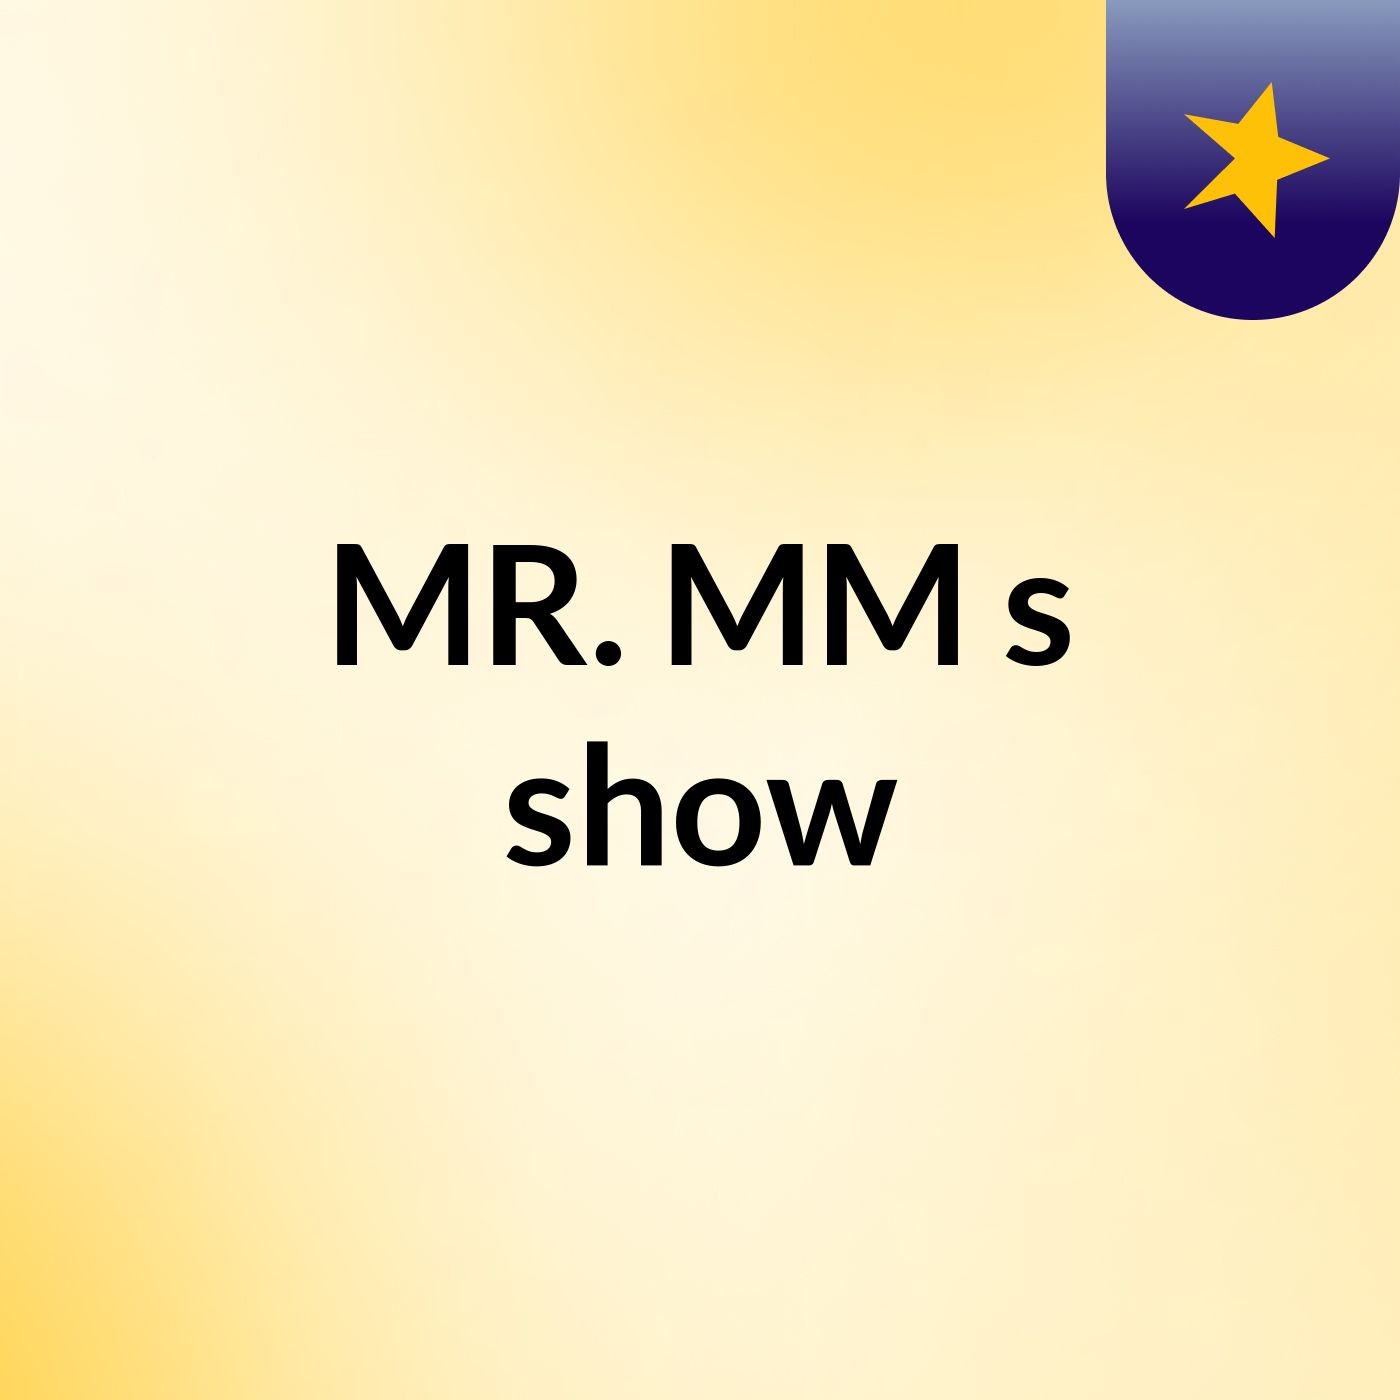 MR. MM's show